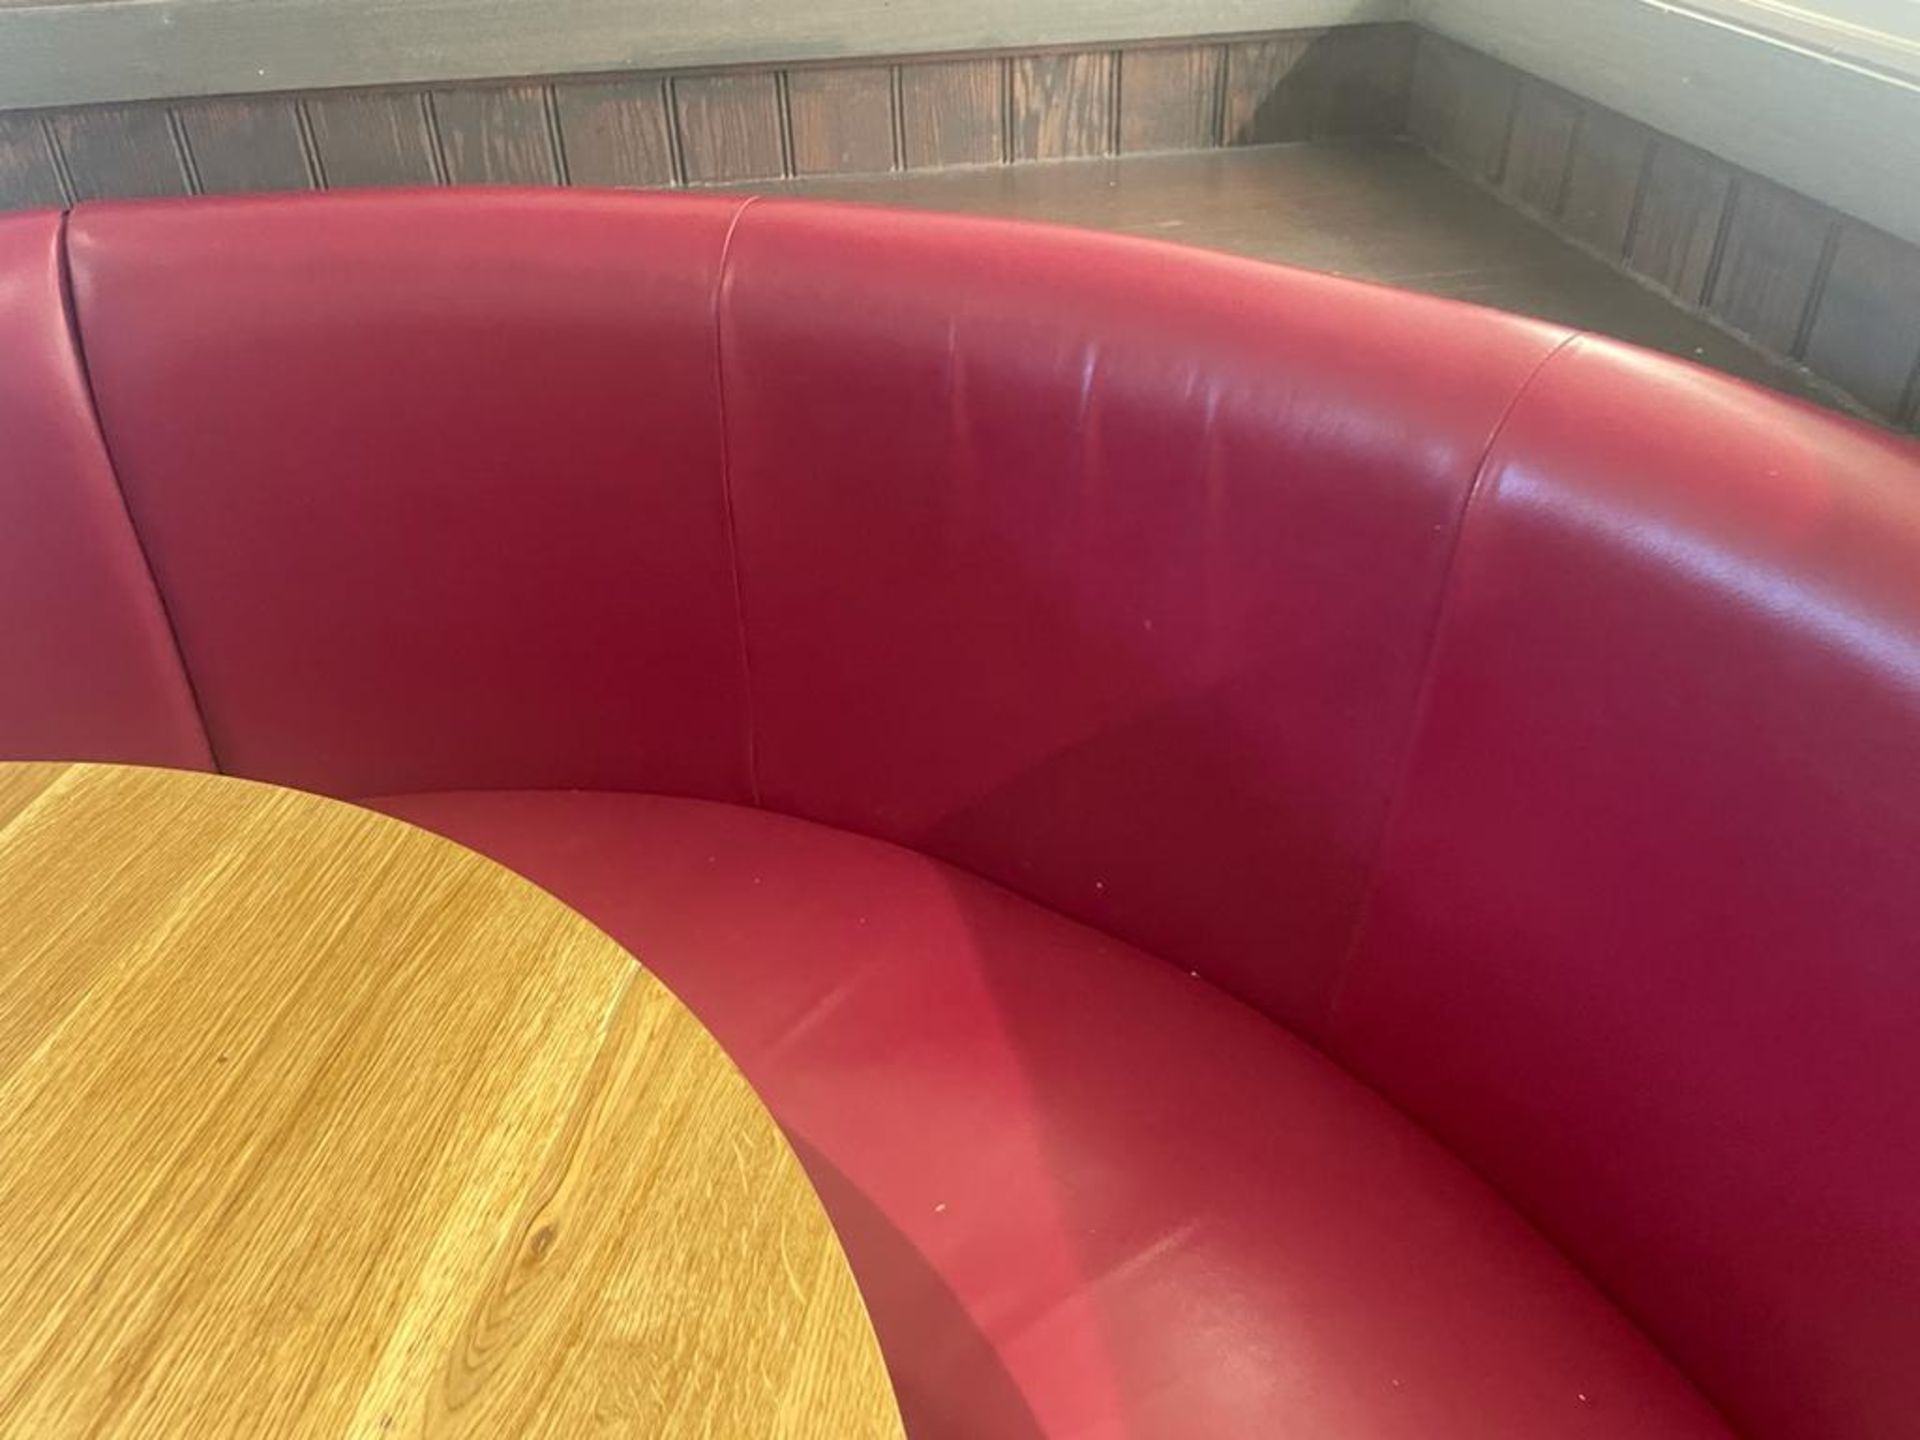 1 x C-Shaped Restaurant Seating Booth With Red Faux Leather Upholstery - Image 6 of 6